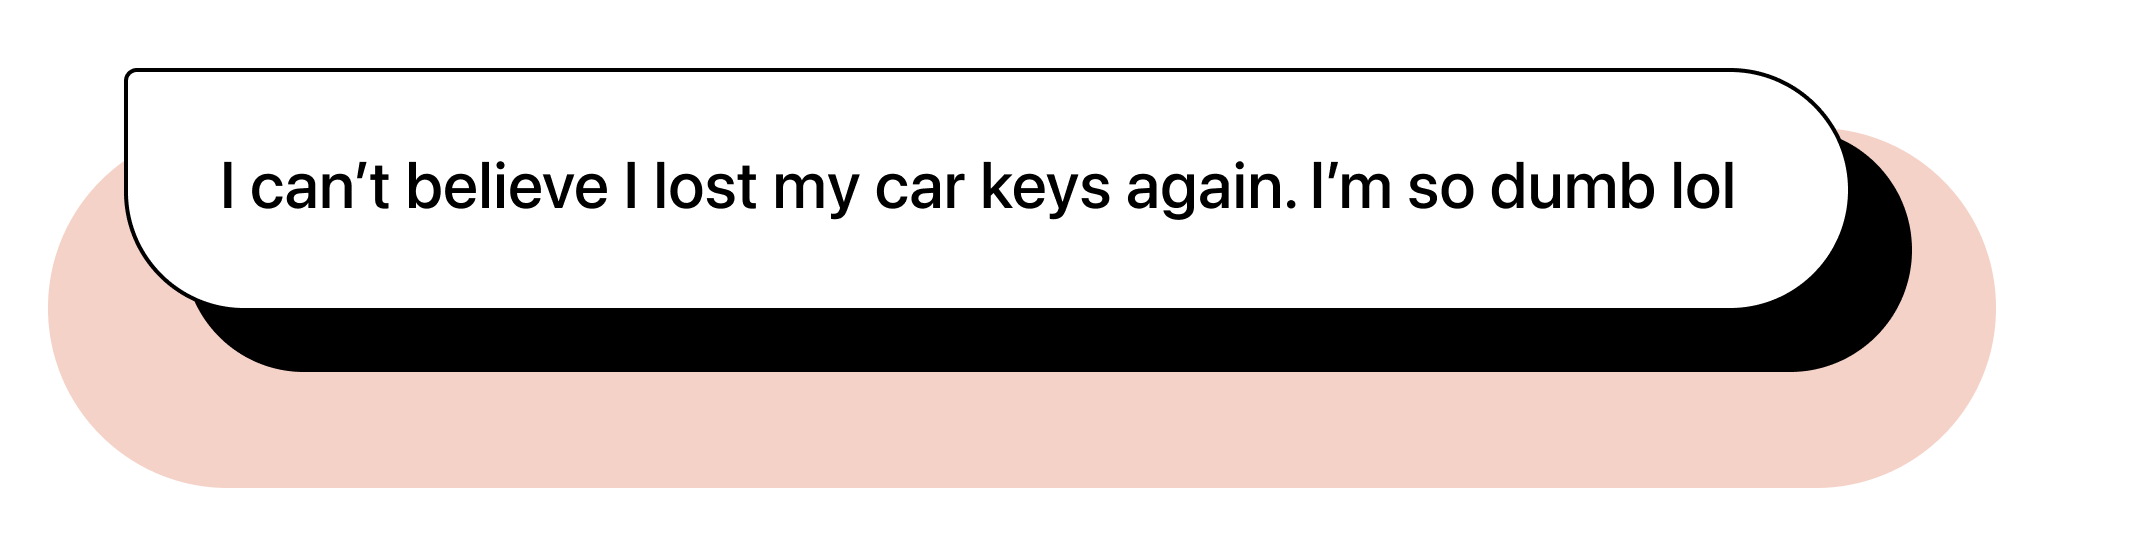 Chat bubble graphic with text "I can't believe I lost my car keys again. I'm so dumb lol"